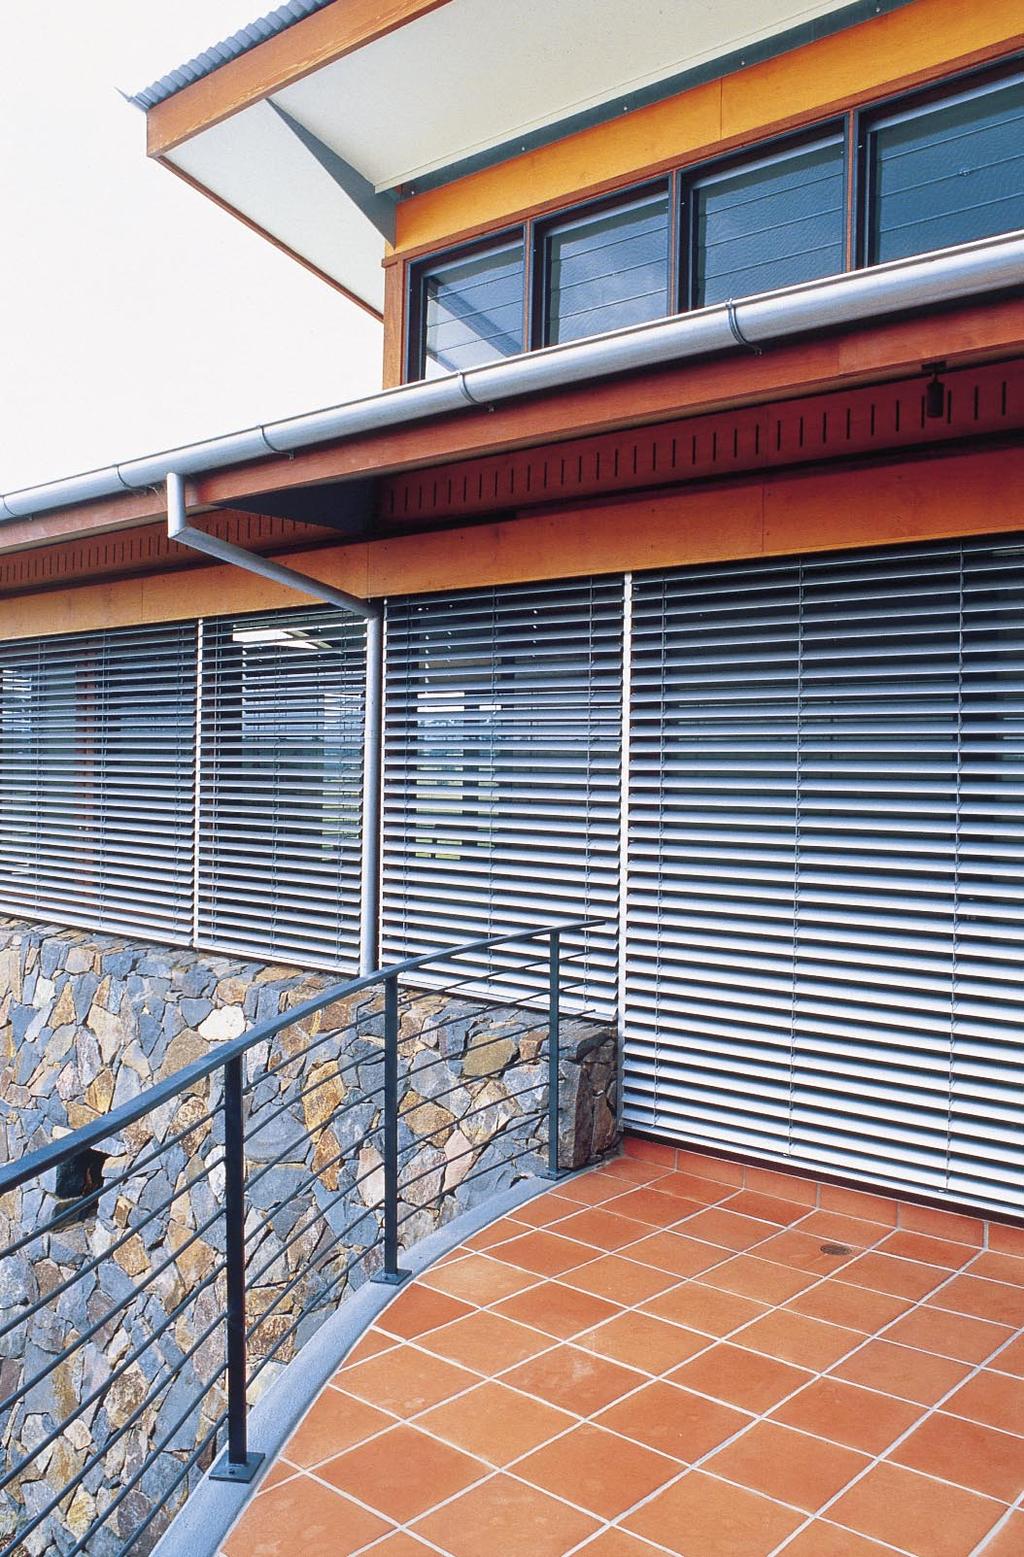 Design Considerations General Considerations Pre-planning for Vental external louvre blinds from the earliest stages of building conception is advantageous, because this is how best blind utilisation